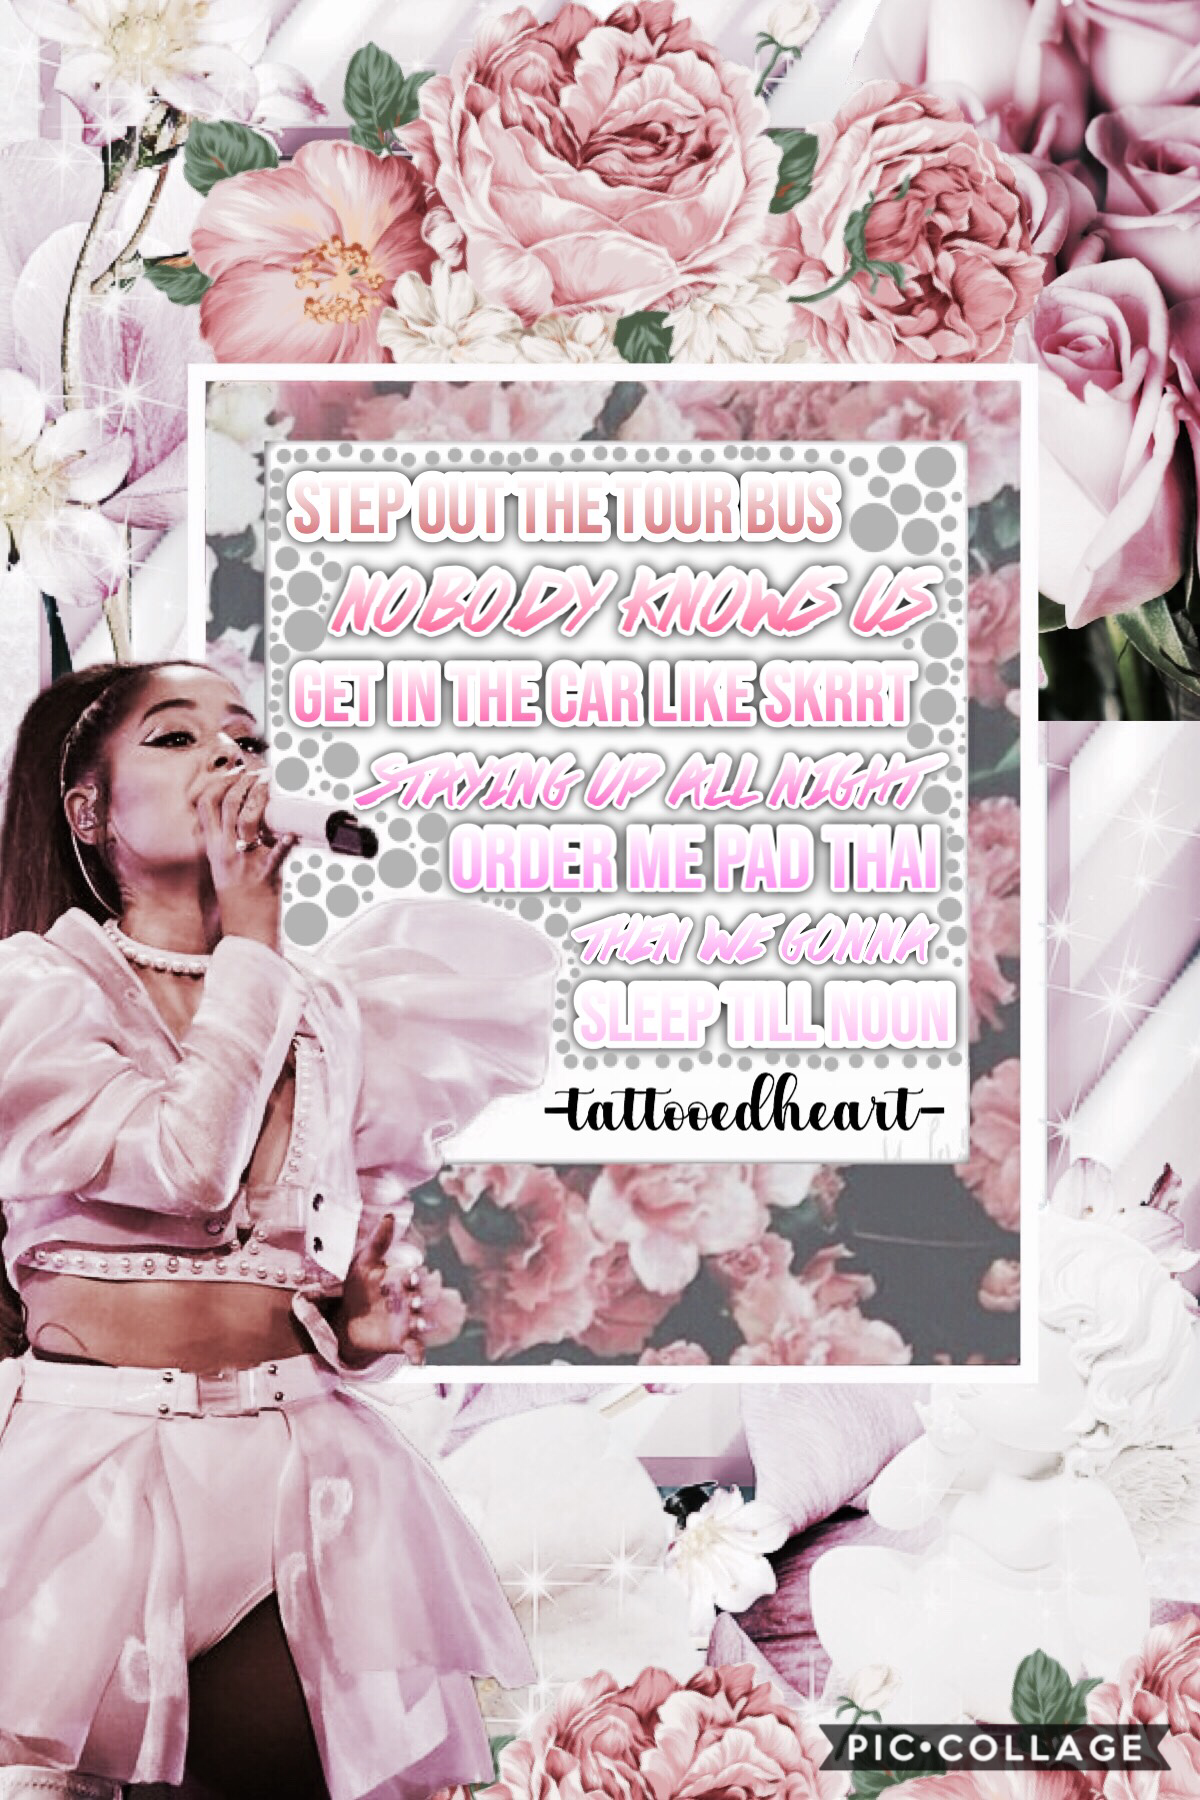 💖Tap💖
Lyrics from the song "Imagine"! The Sweetener/Thank U Next tour kicked off in Albany two nights ago (March 18th) and it was amazing! I'm going to the concert in April! Can't wait!!!